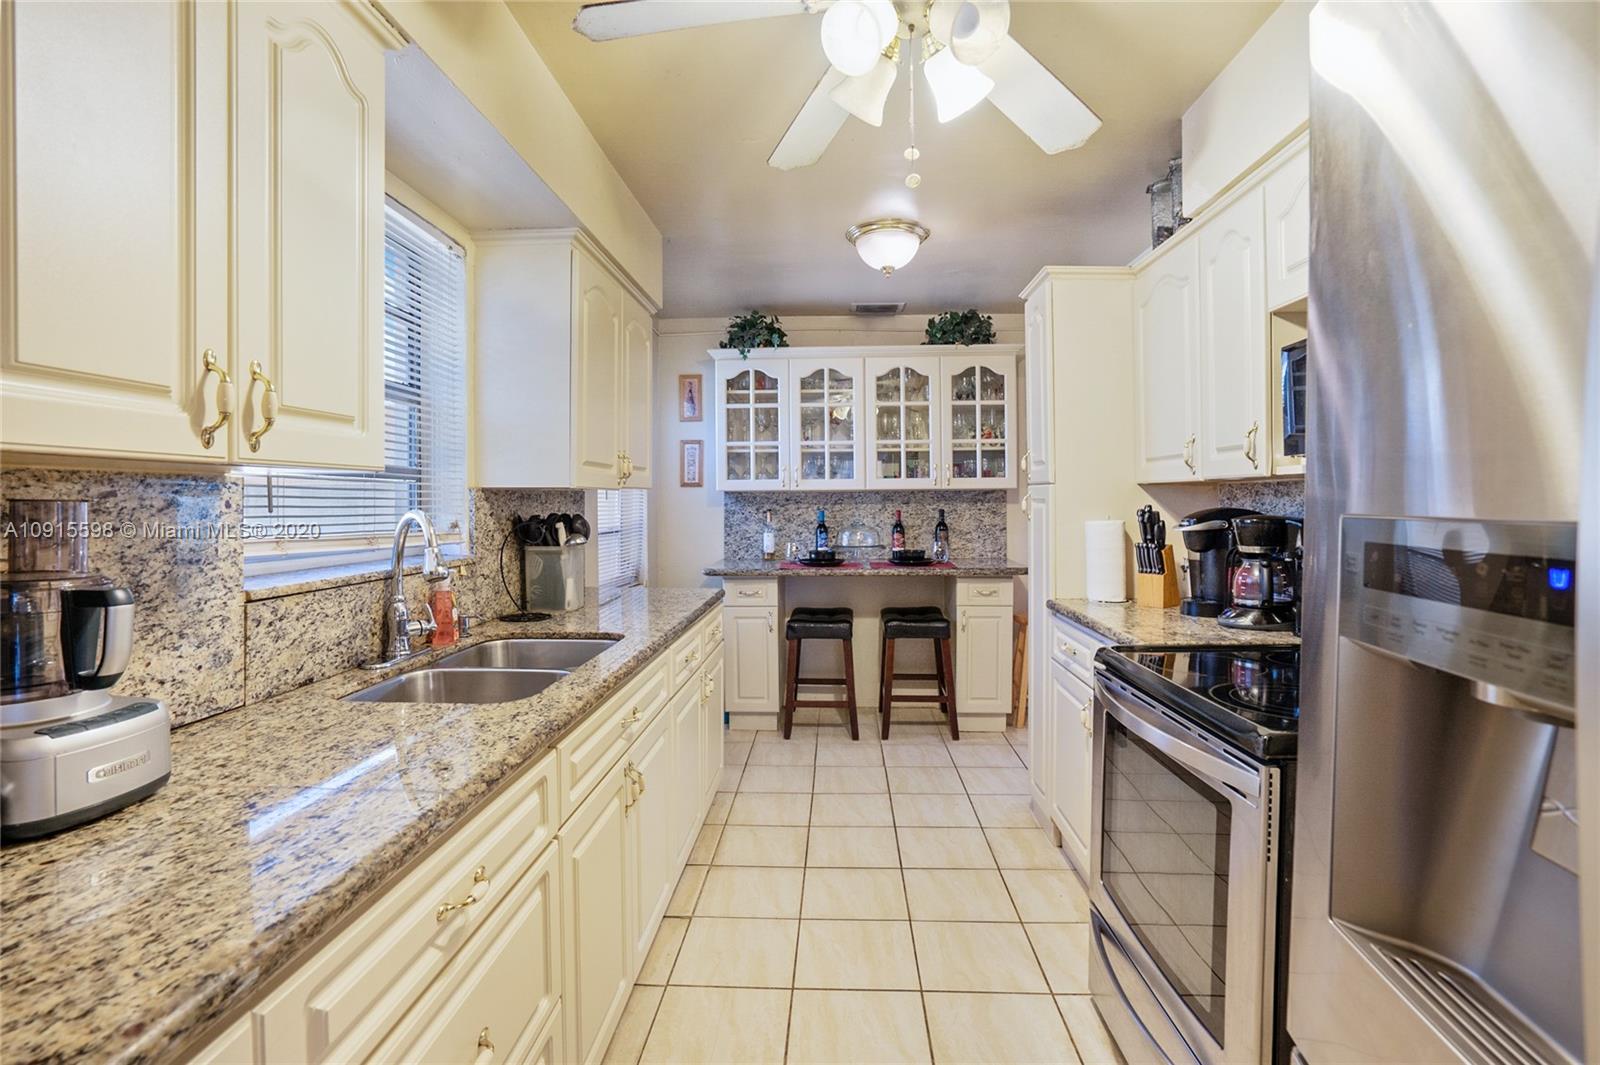 a kitchen with stainless steel appliances granite countertop a stove sink and cabinets